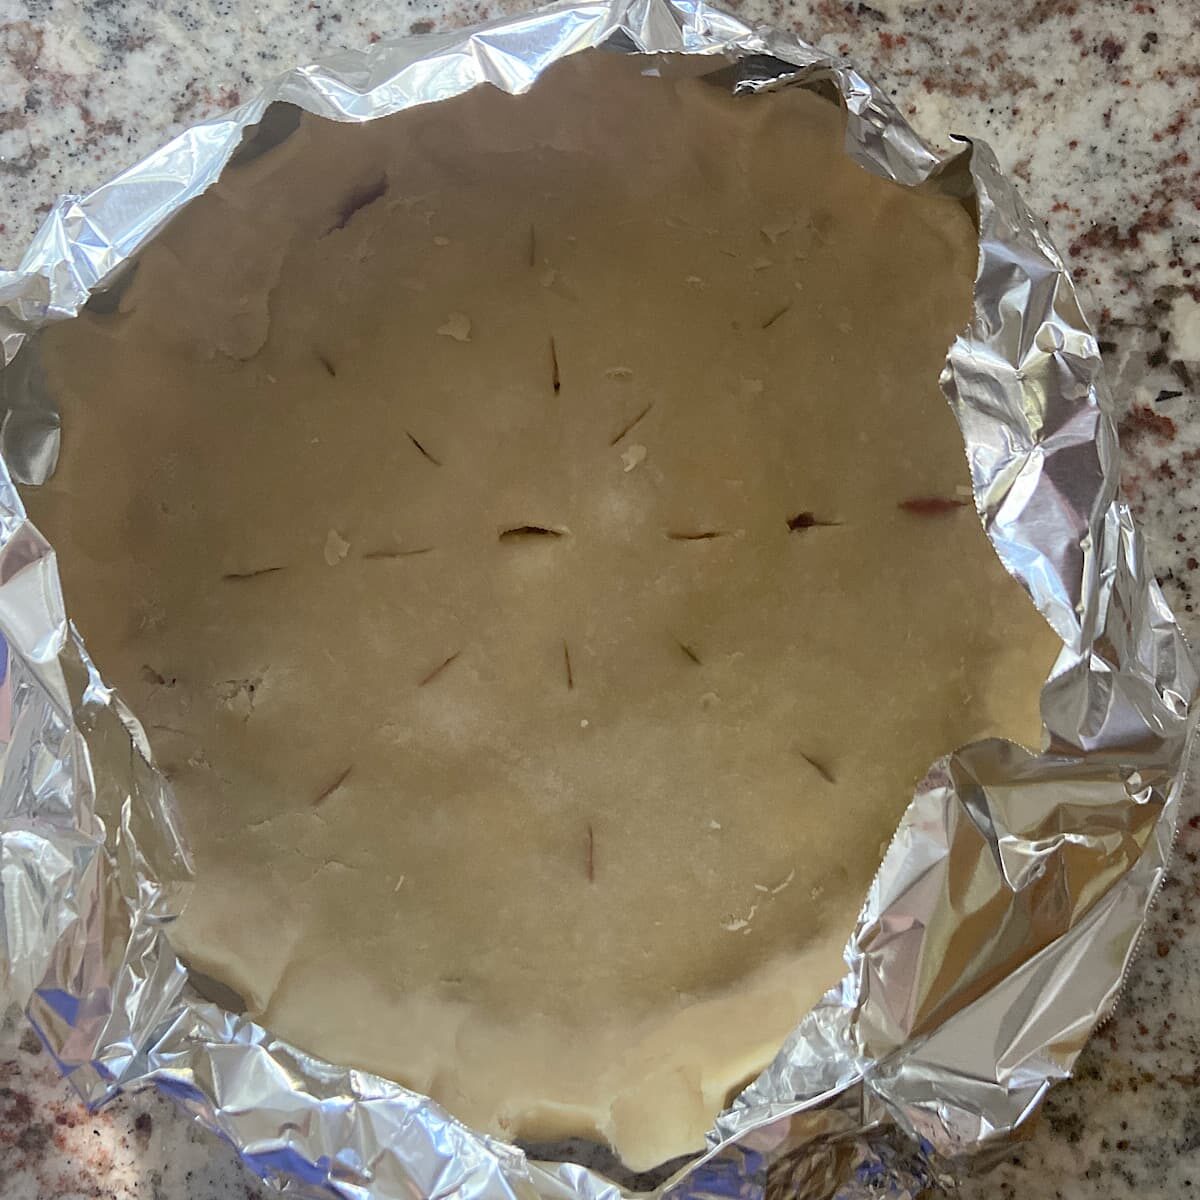 wrap foil around pie edges to prevent over browning